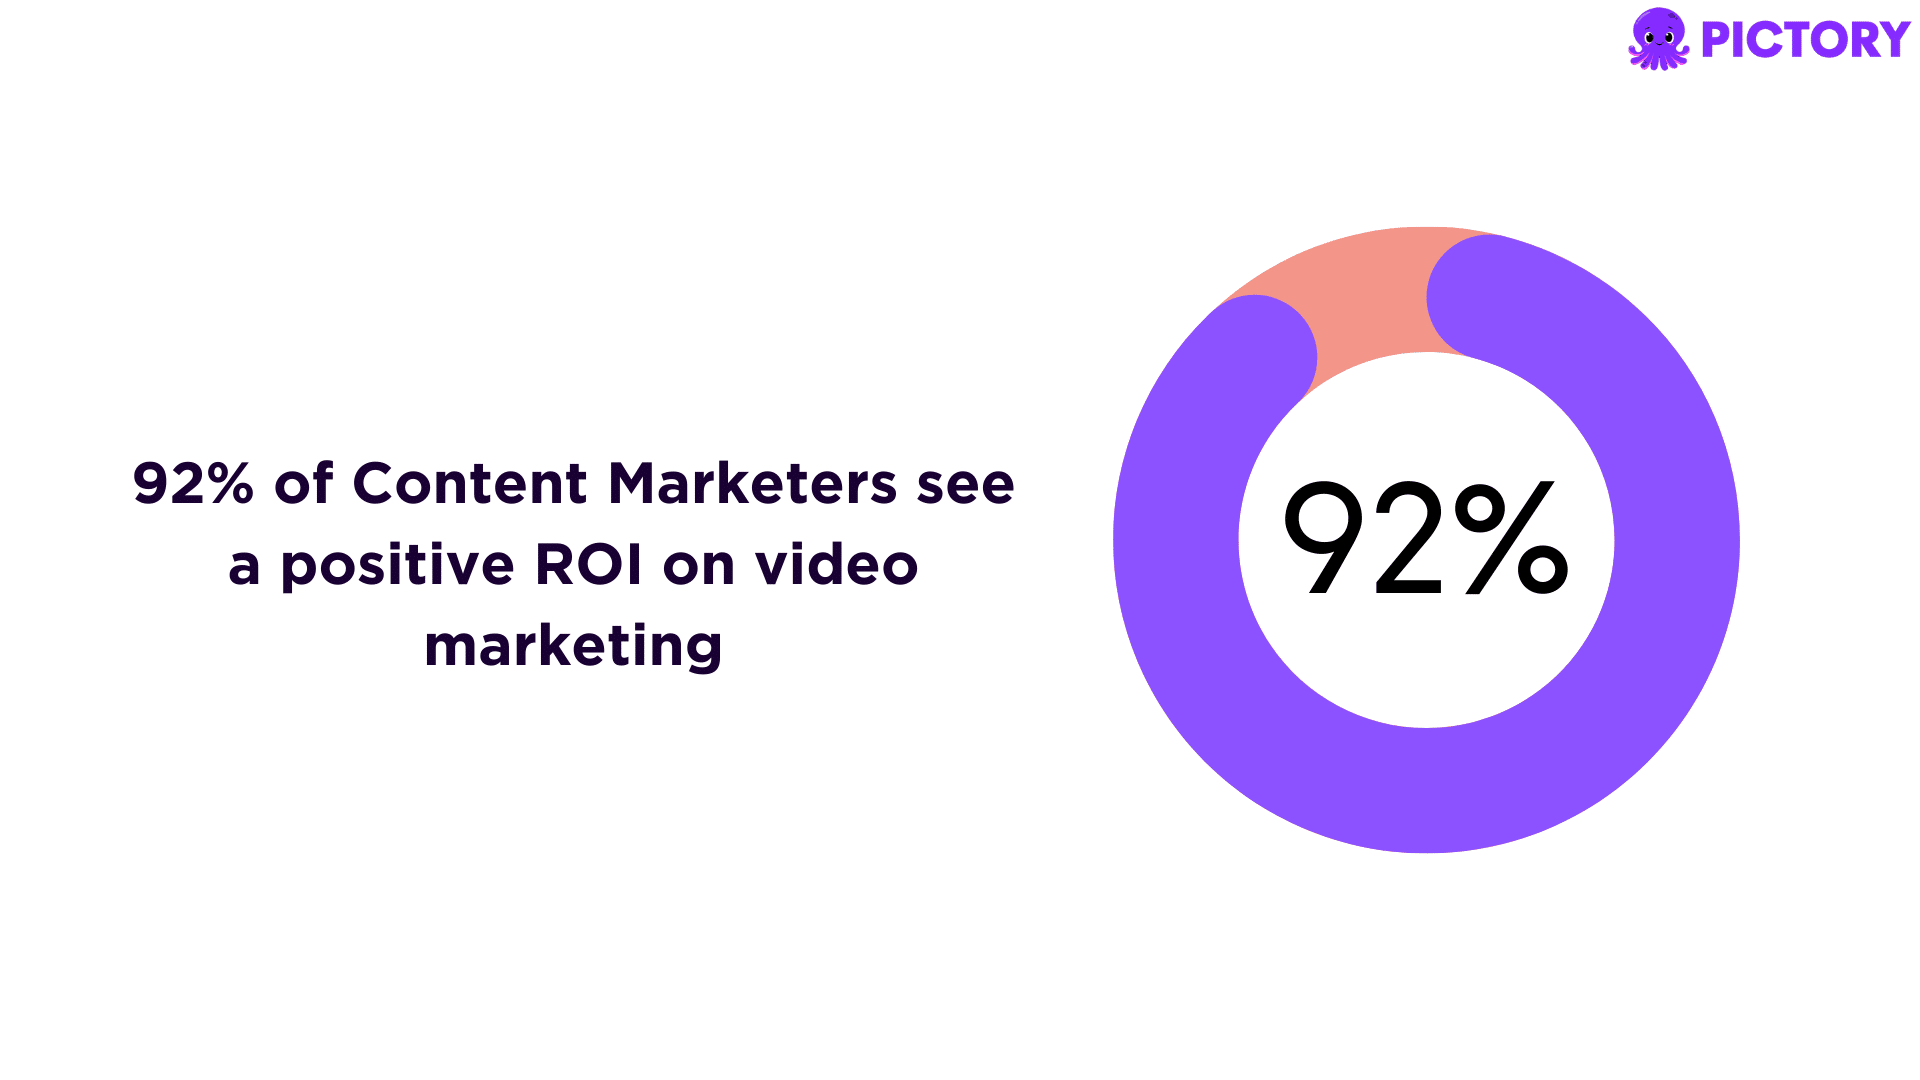 A recent study revealed that 92% of content marketers see a positive ROI on video marketing efforts.